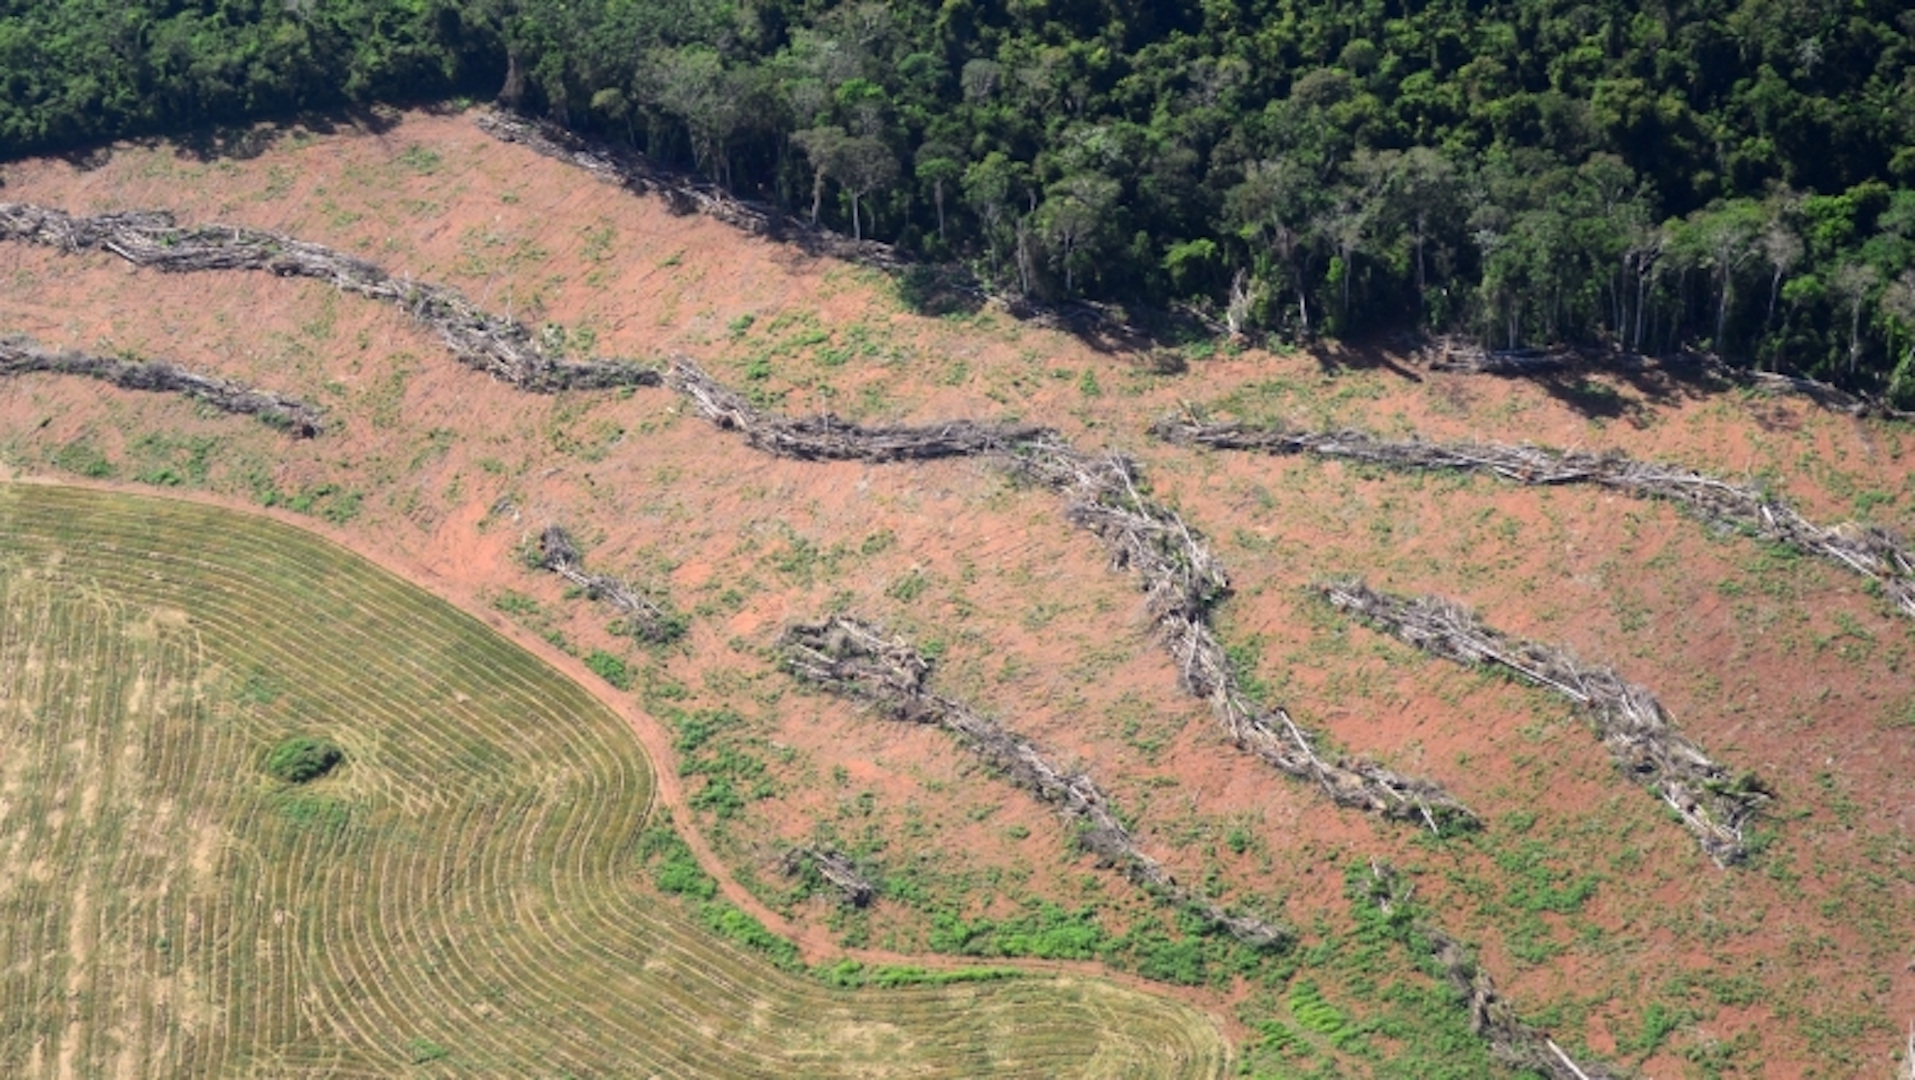 Brazil,Deforestation in the Amazon is done to clear land for cattle, grain and lumber